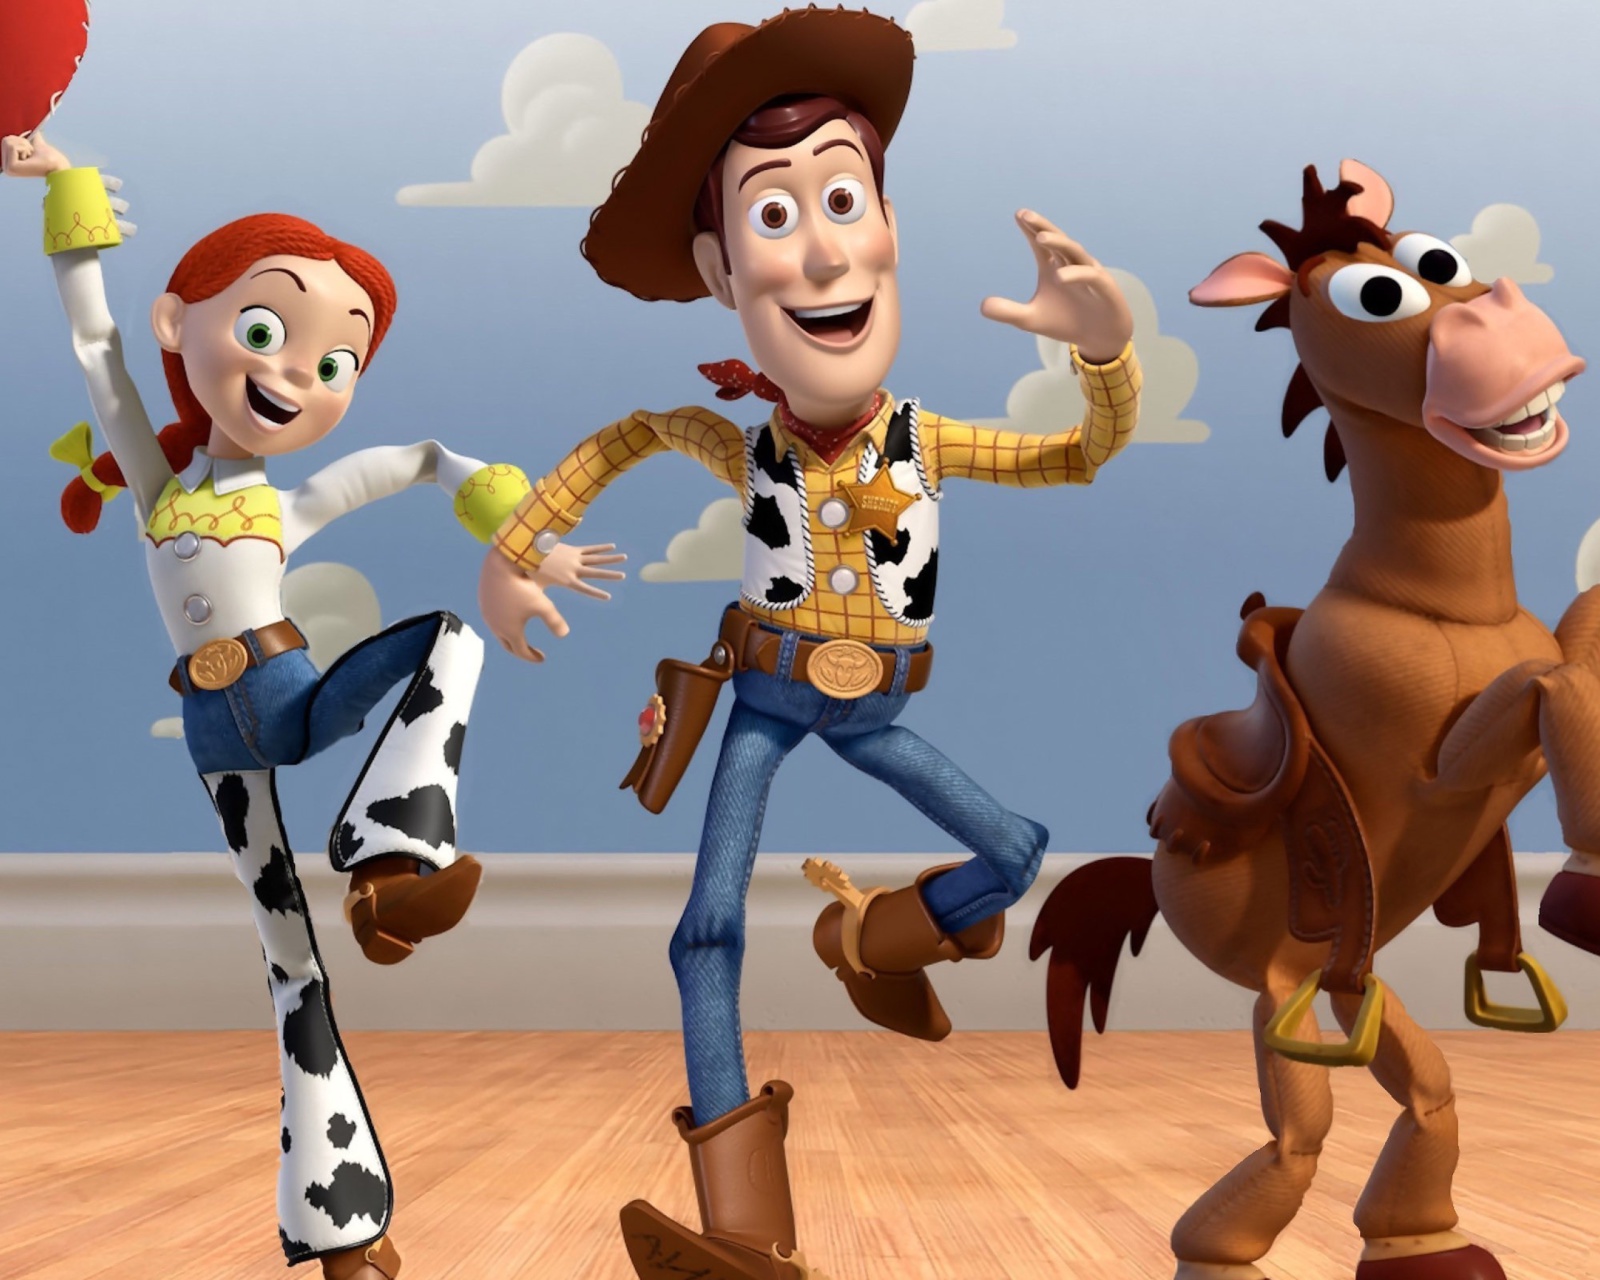 Das Woody in Toy Story 3 Wallpaper 1600x1280